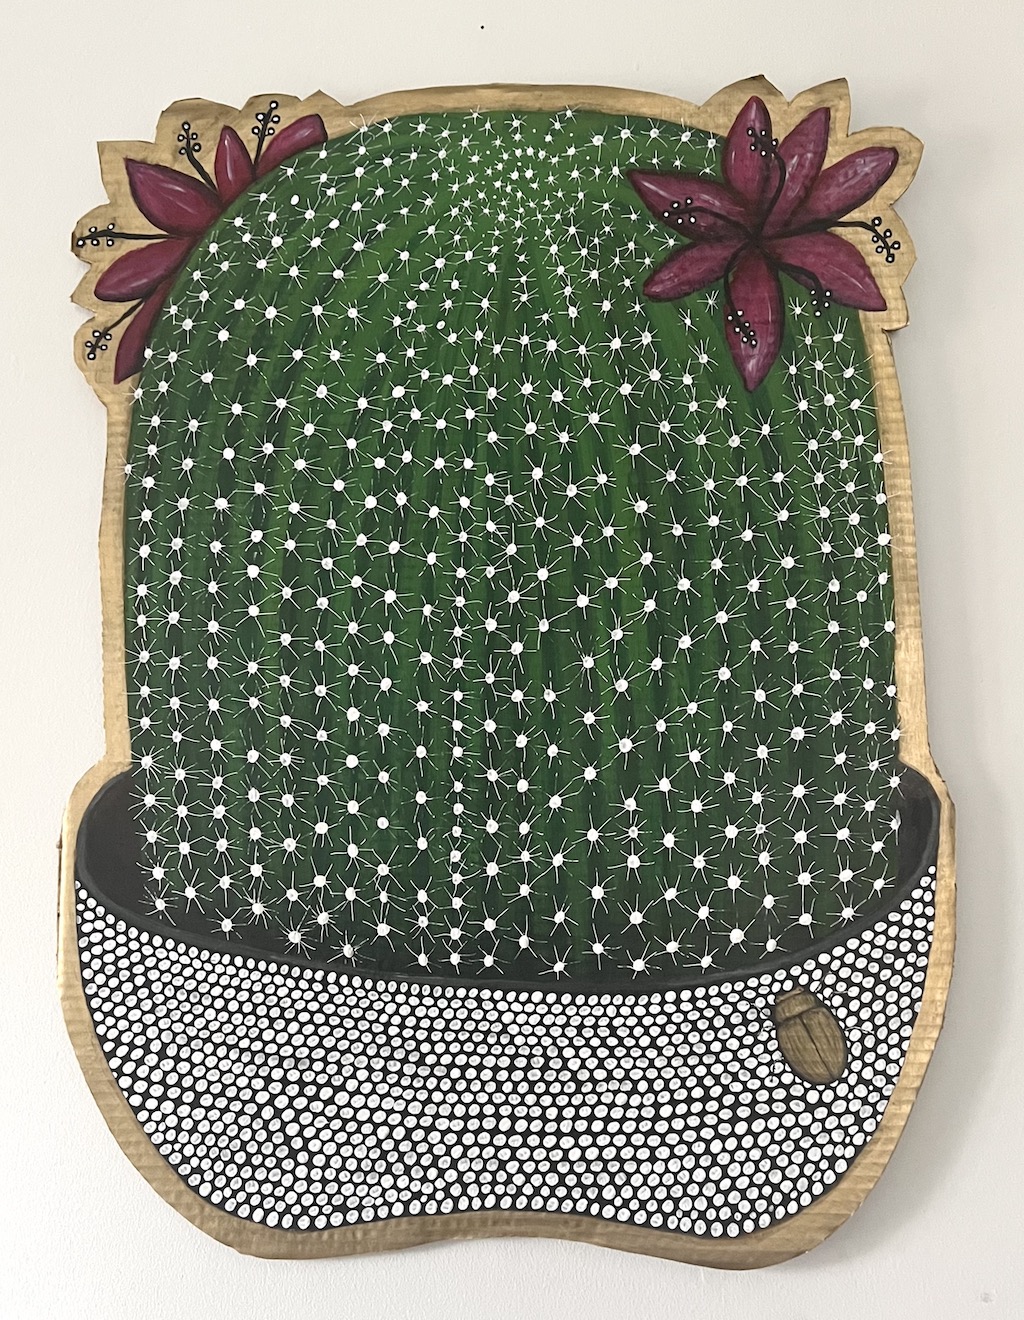 "Cactus 2" Acrylic on Recycled cardboard Basel 2023 by Juliette Lepage Boisdron